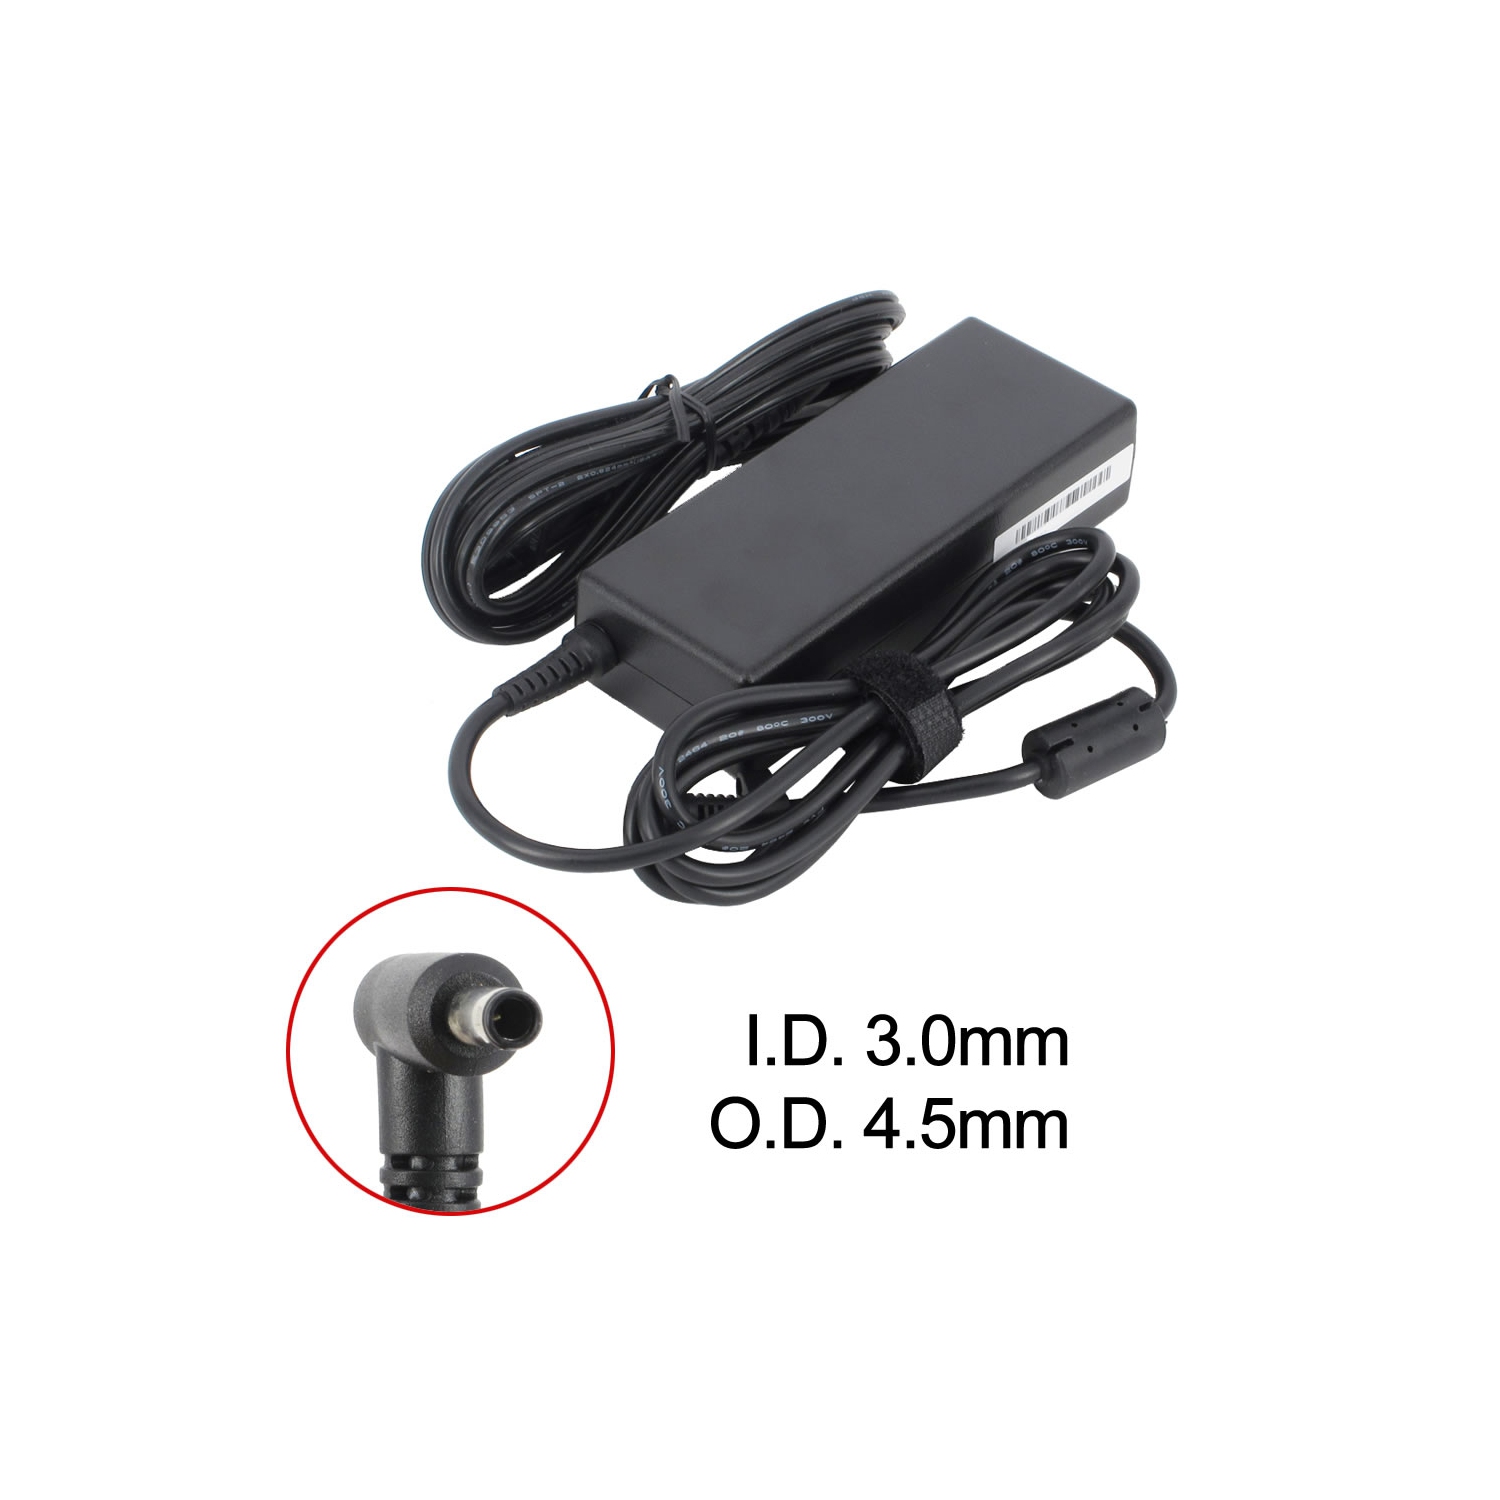 New Replacement Laptop AC Adapter for HP Pavilion x360 14-cd, 719309-001, 741427-001, H6Y83AA, HSTNN-DA15, PA-1450-36HE